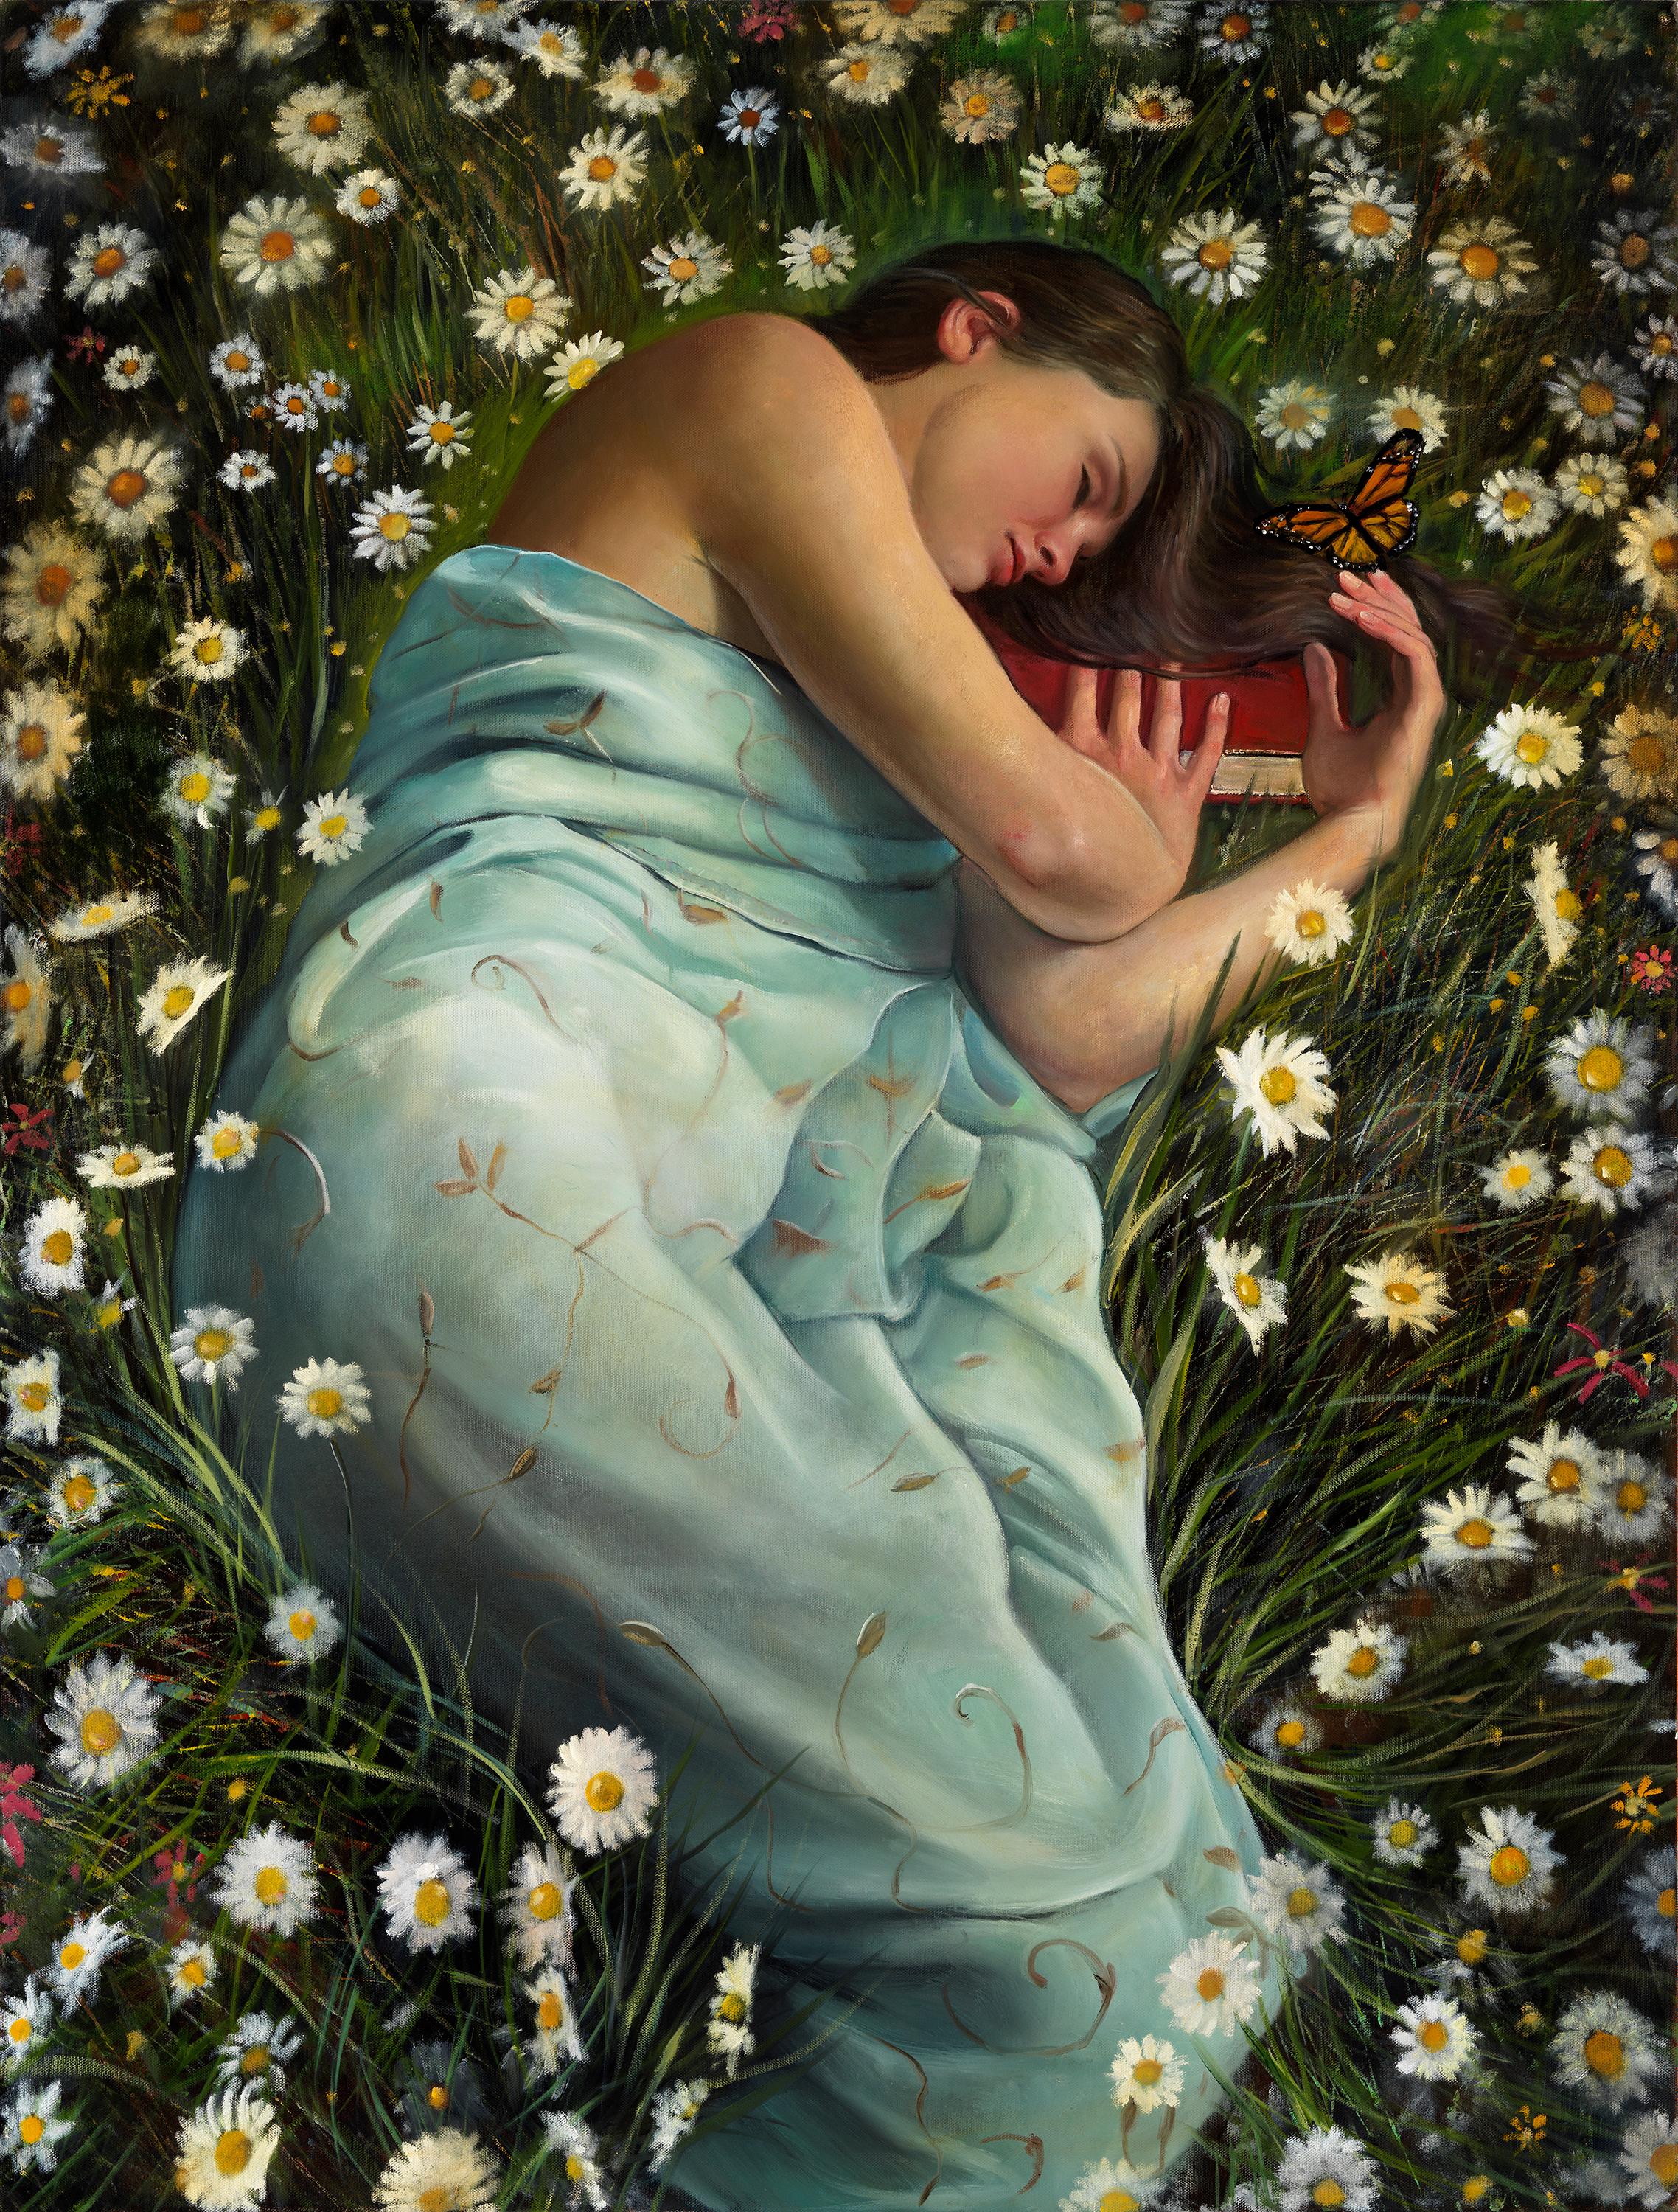 Bruno Surdo Figurative Painting - Whispers of a Dreamer - Woman Asleep in Field of Daisies, Original Oil Painting